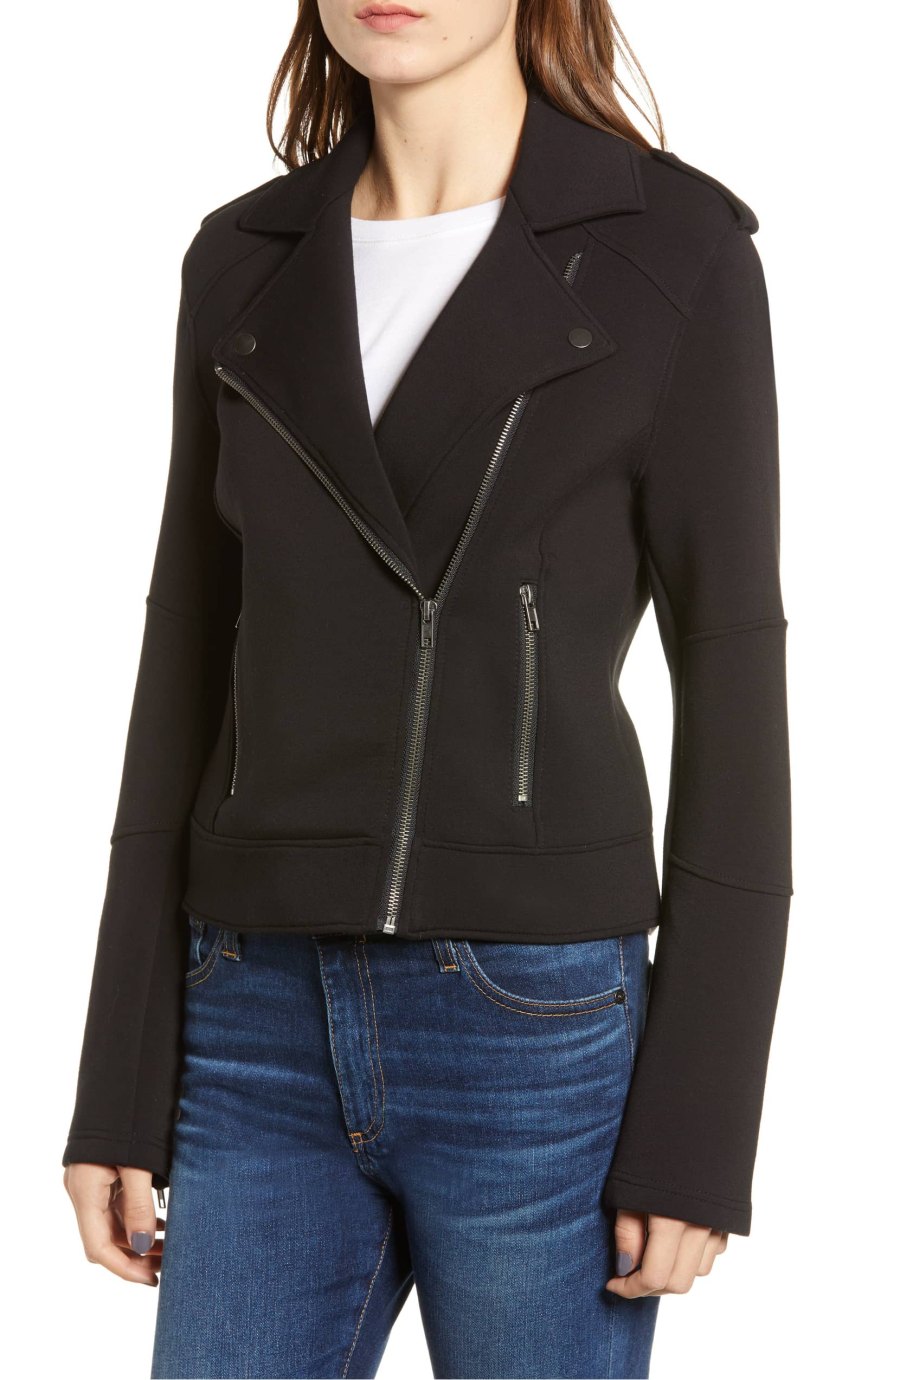 Shop This Edgy Scuba Moto Jacket for Under $150 | Us Weekly